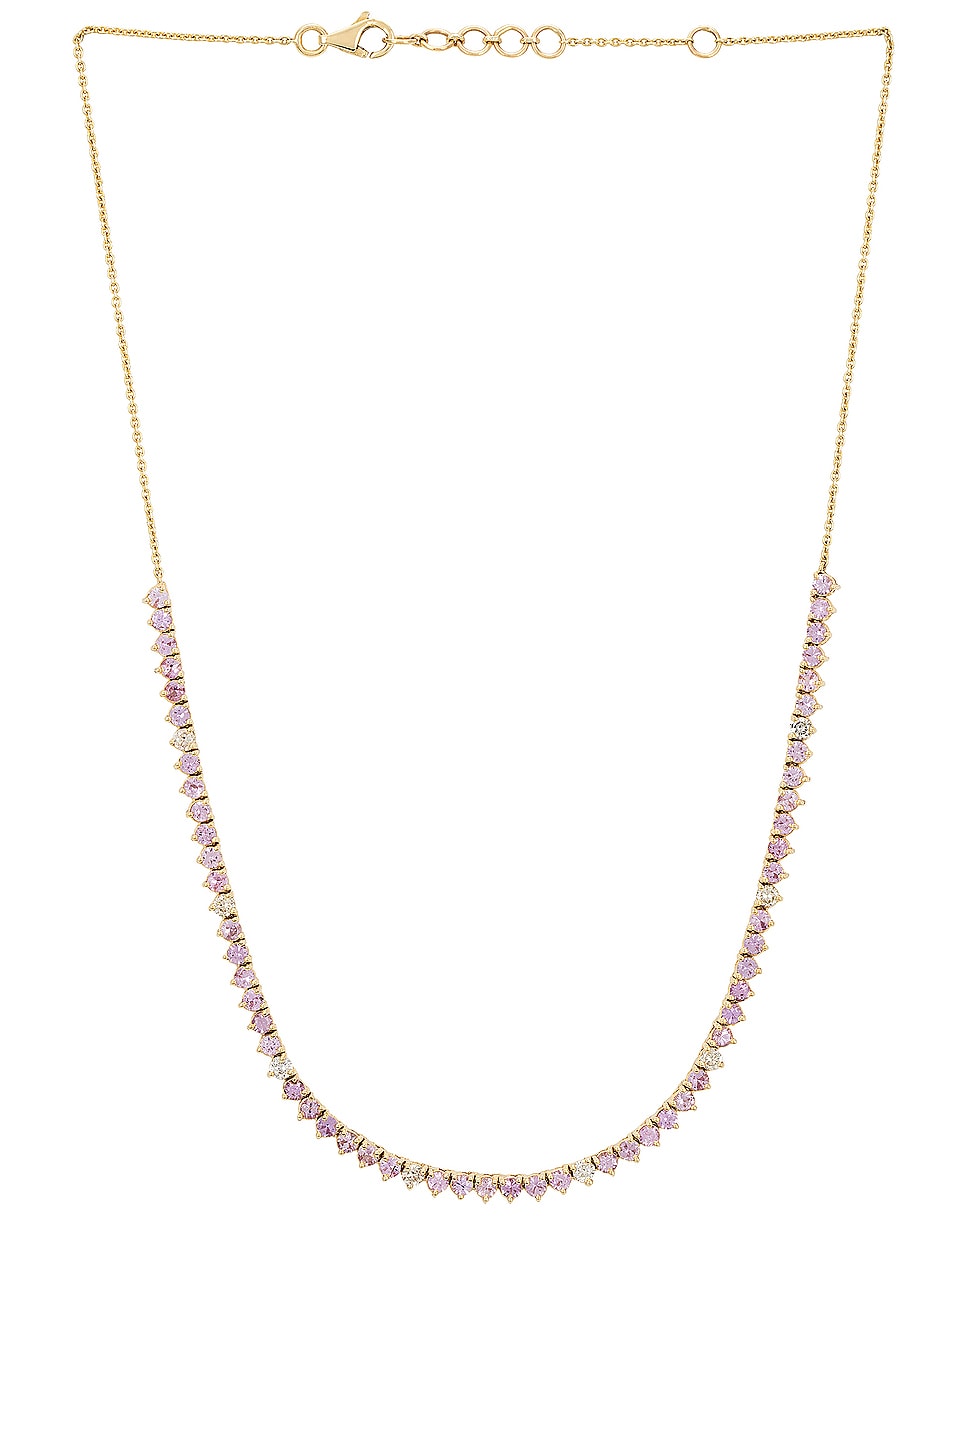 Image 1 of Siena Jewelry Riviera Necklace in 14k Yellow Gold, Diamond & Pink Sapphire